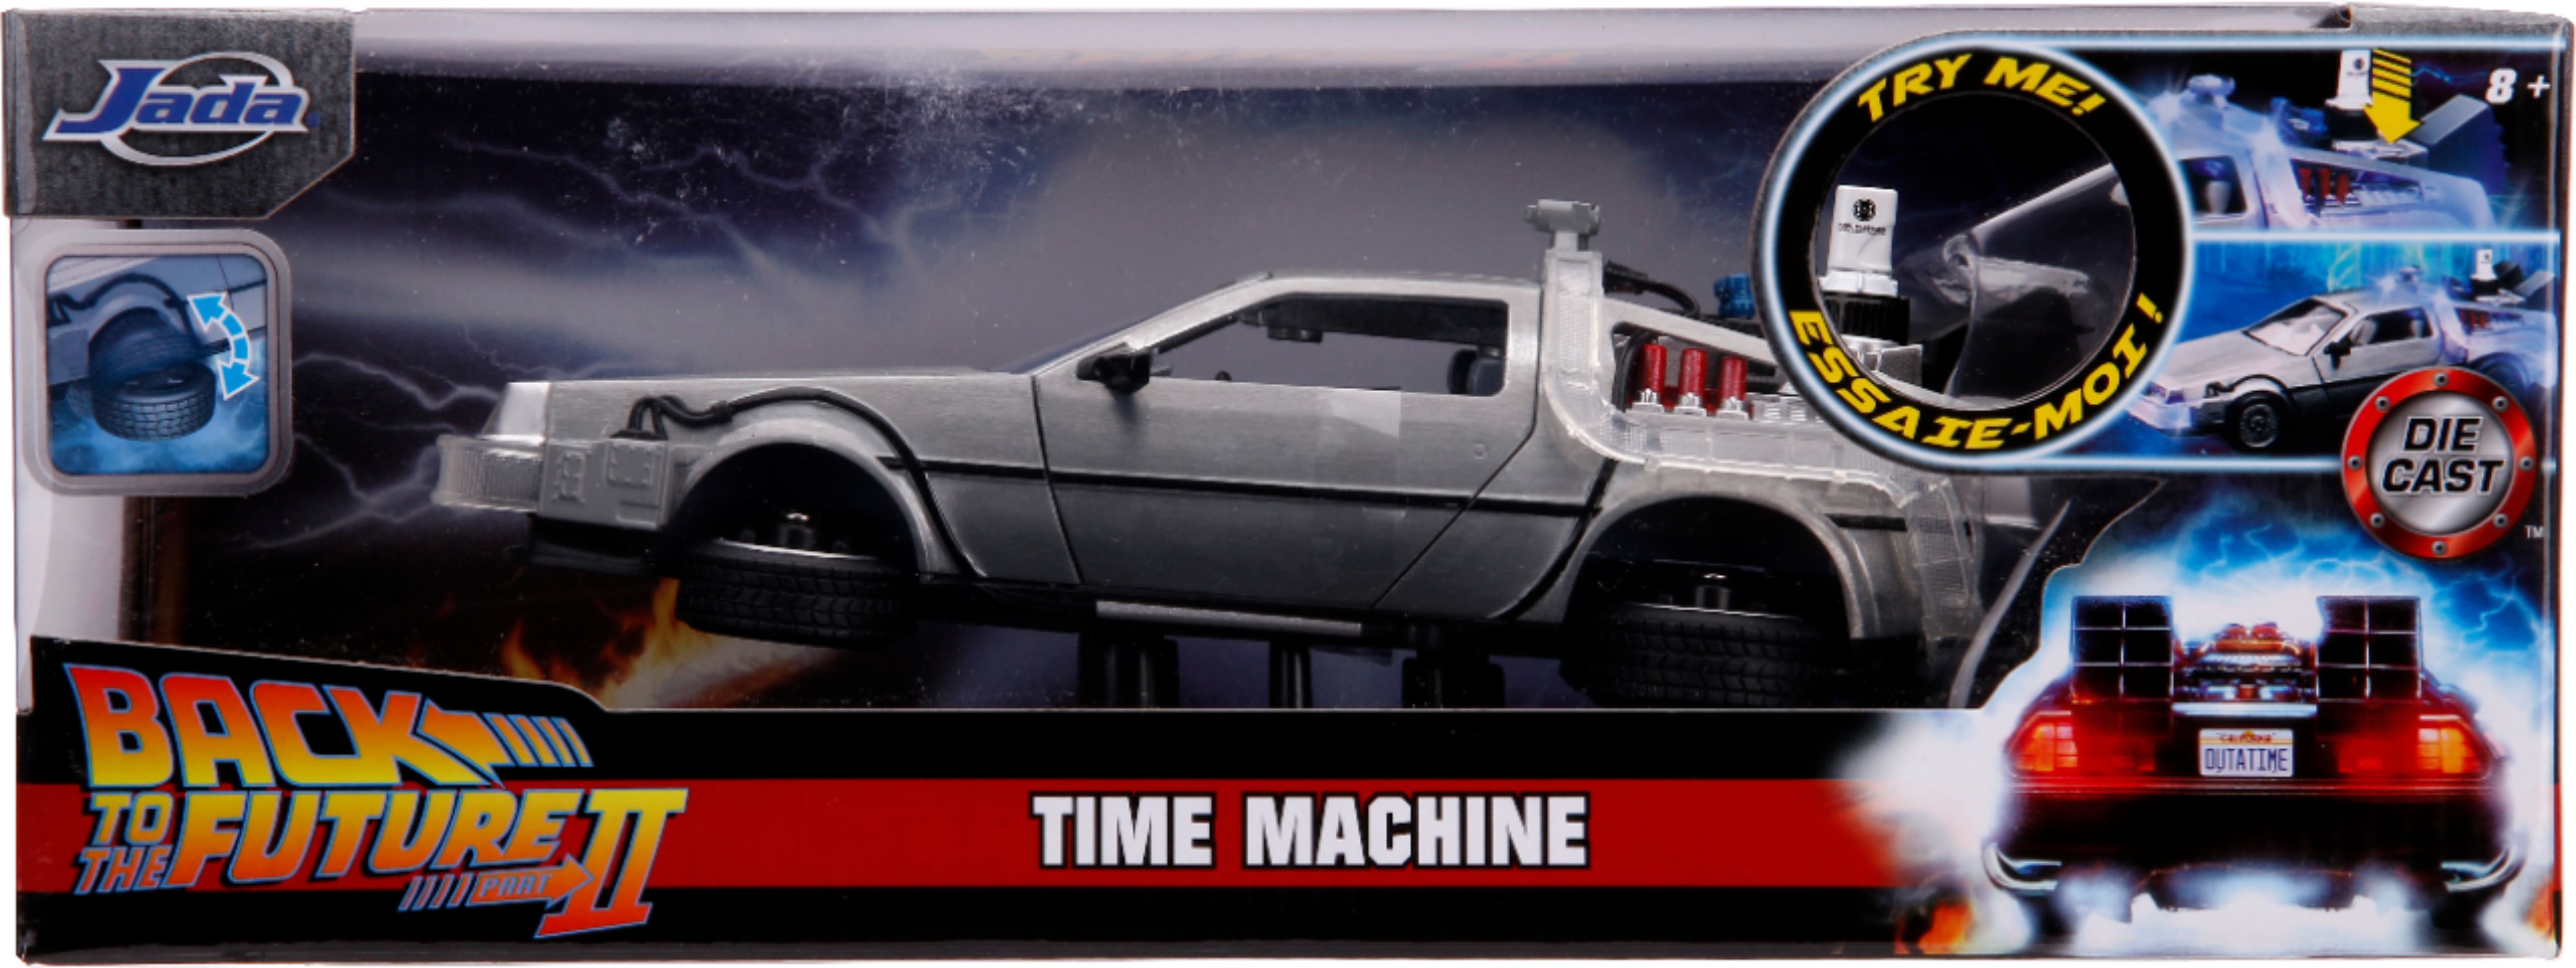 31468 for sale online Jada Toys Back to the Future 2 1:24 DeLorean Time Machine